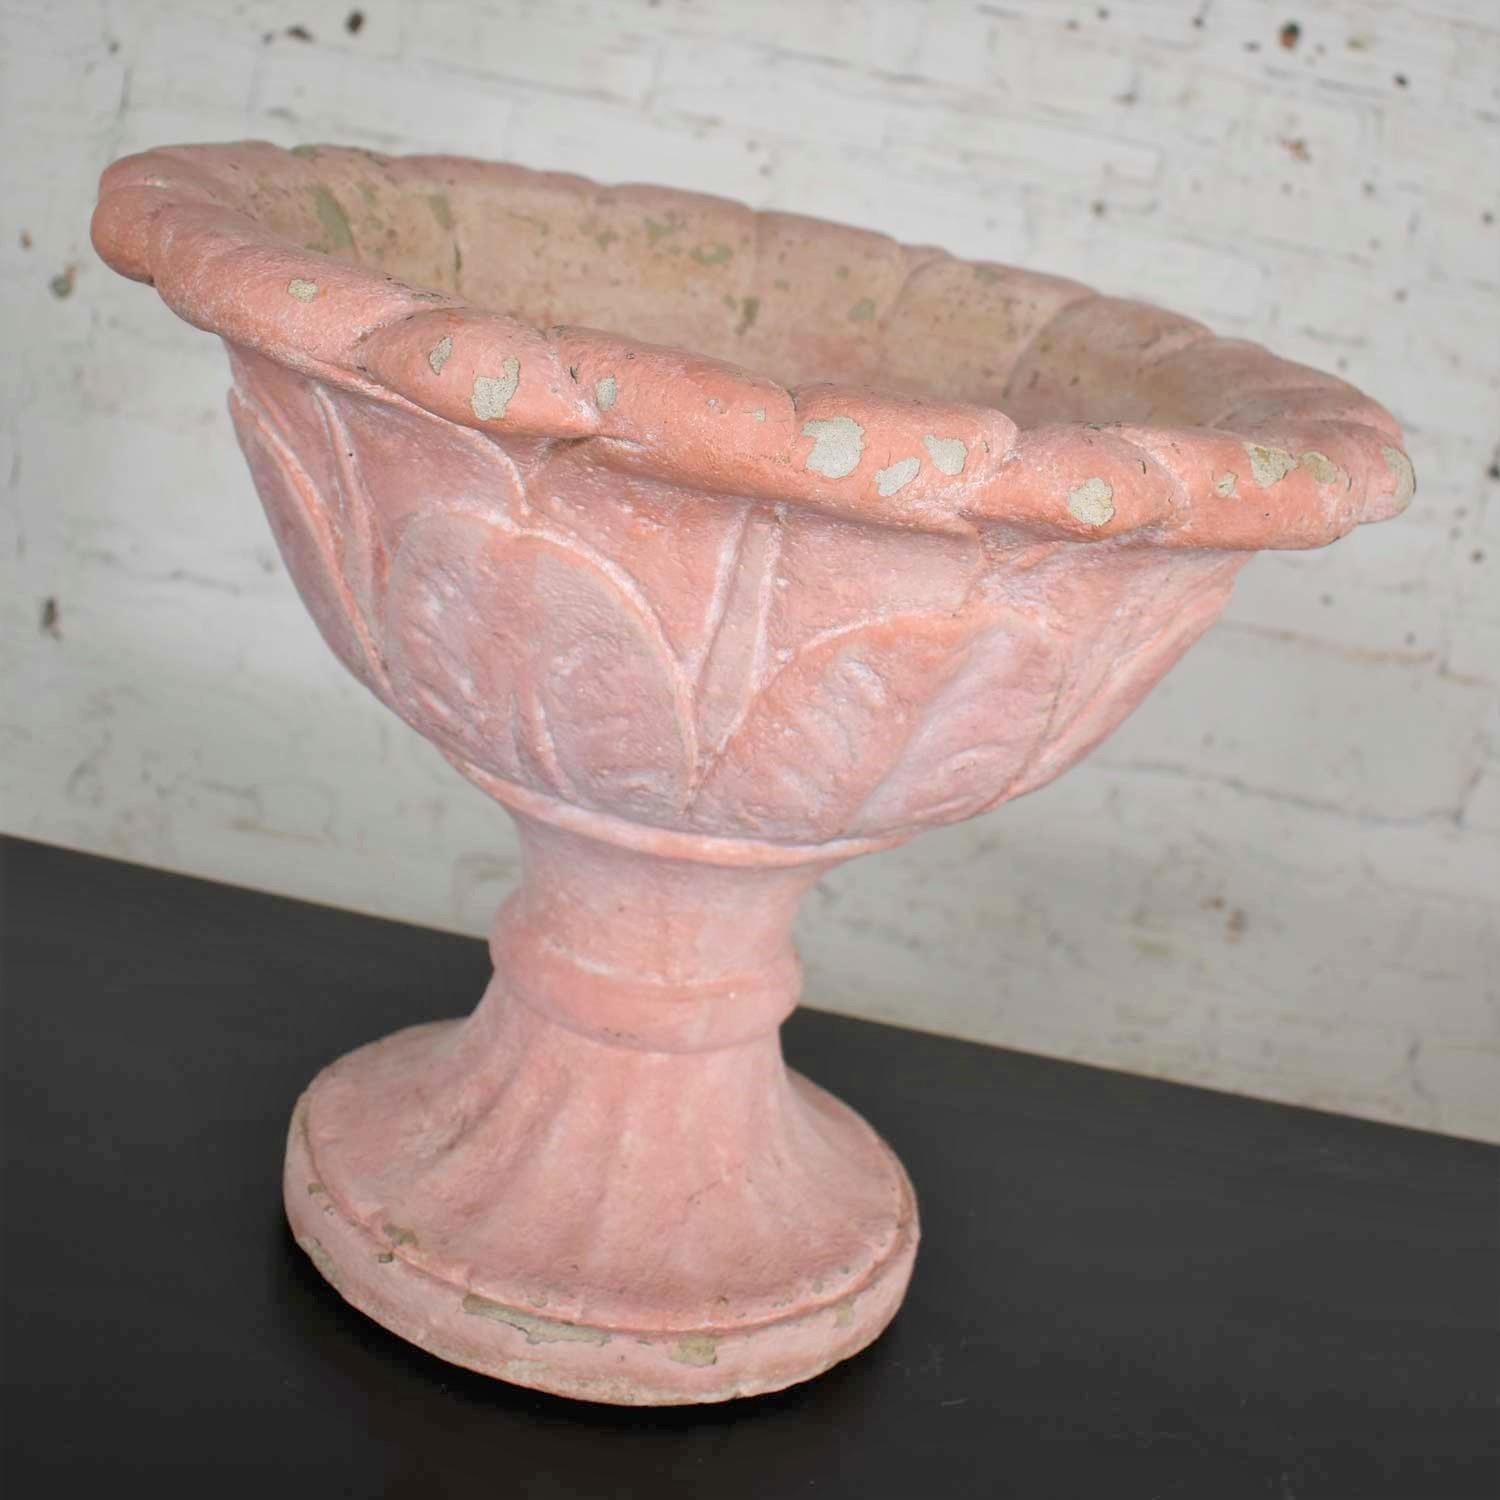 Awesome antique concrete garden urn or planter. This salmon colored paint encrusted urn is in fabulous vintage condition with lots of gorgeous natural age patina. Please see photos, circa 20th century.

This incredible antique garden urn should be